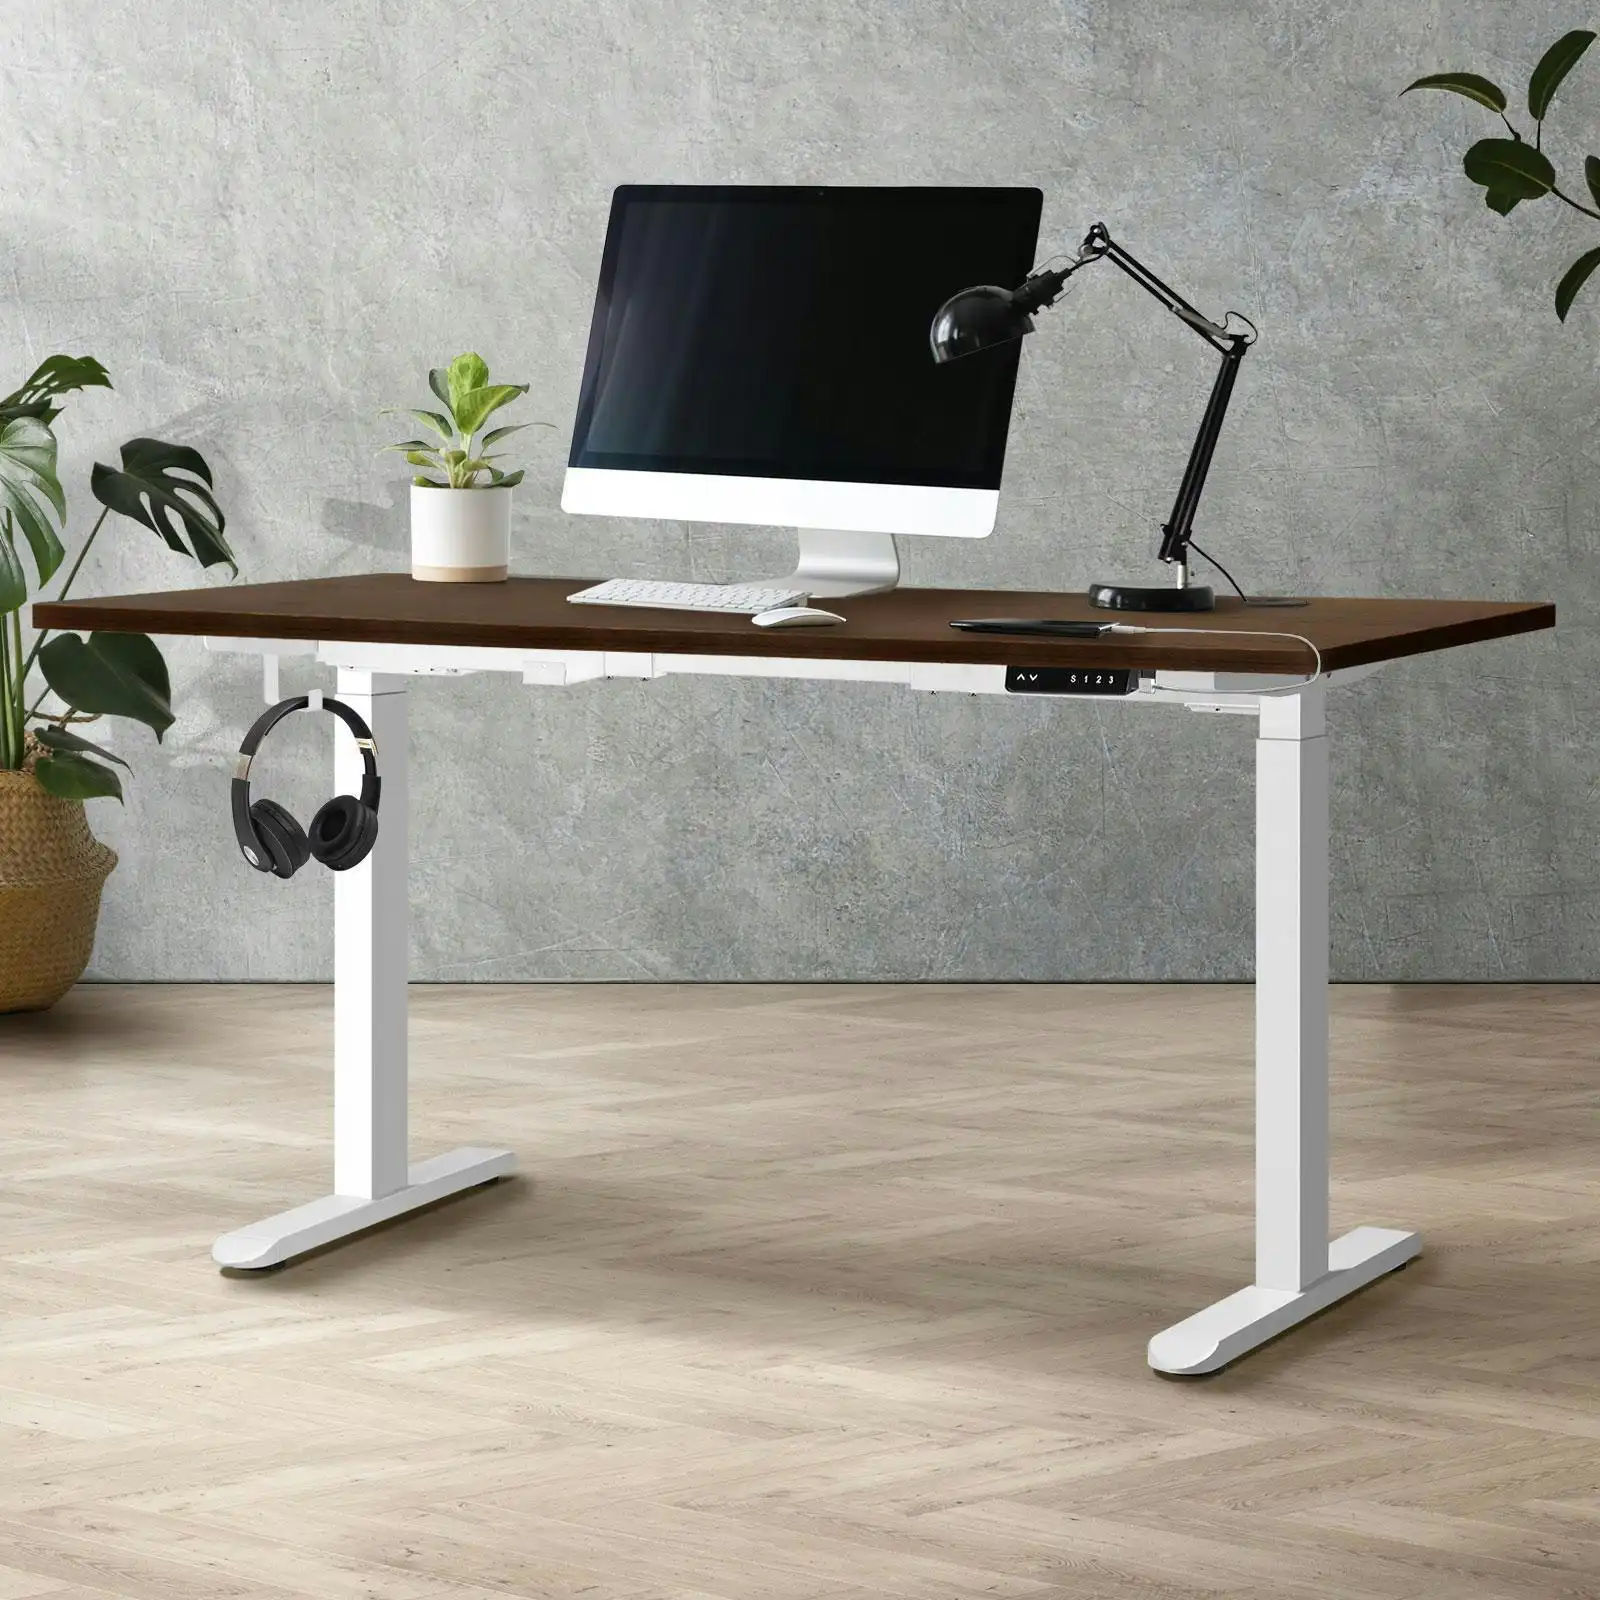 Oikiture 140cm Electric Standing Desk Dual Motor White Frame Walnut Desktop With USB&Type C Port